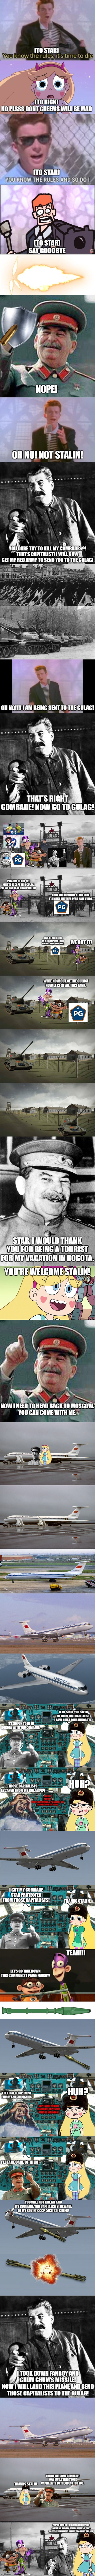 The Full Trilogy (freestream) | image tagged in trilogy,joseph stalin,stalin,soviet union,star vs the forces of evil,gulag | made w/ Imgflip meme maker